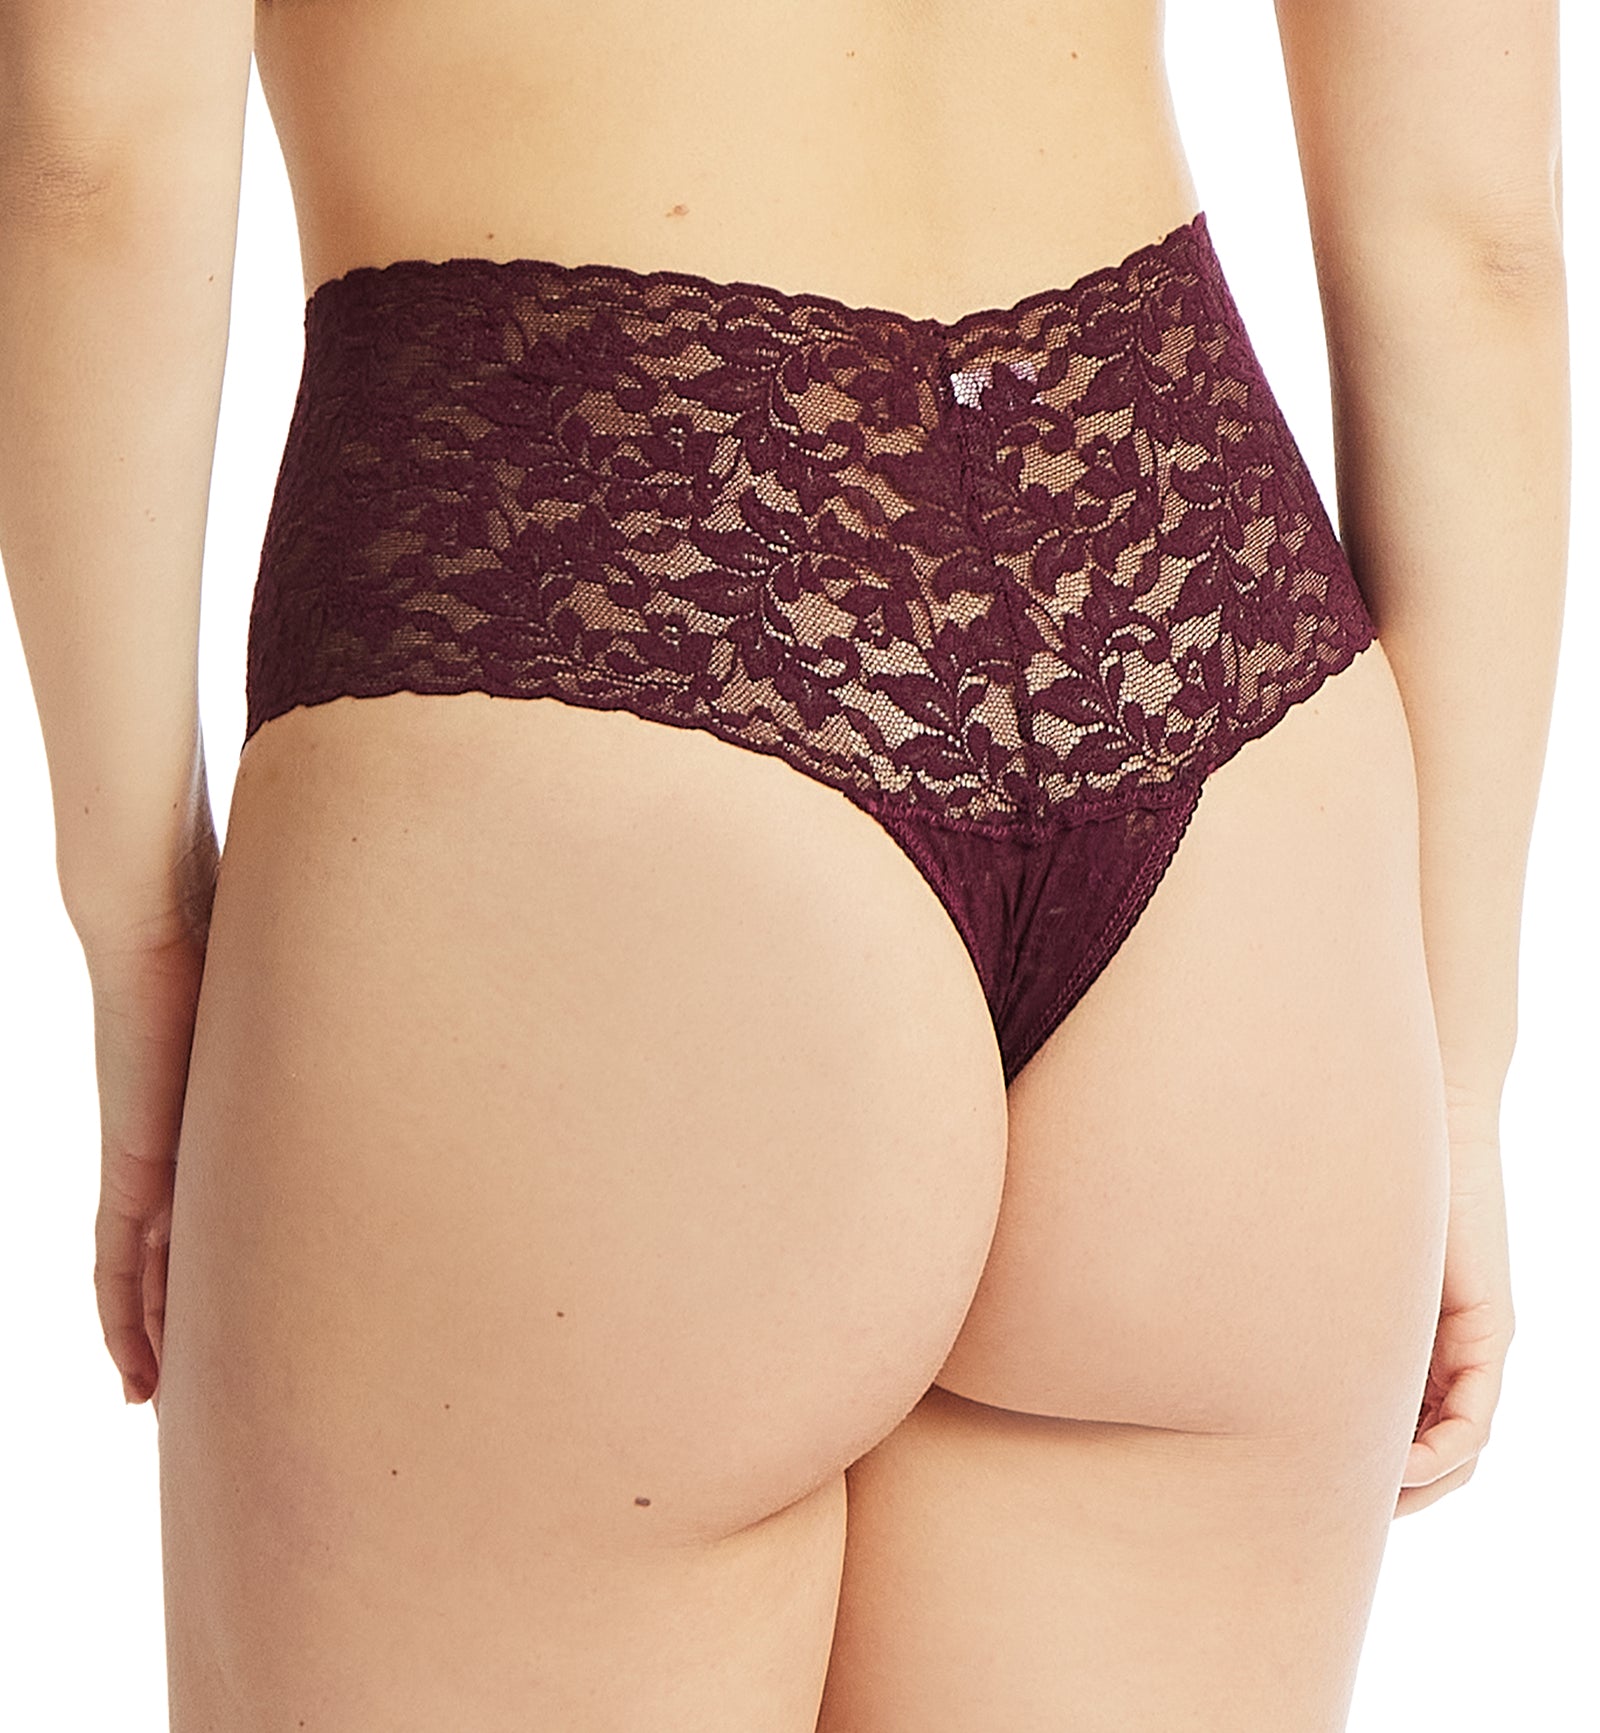 Hanky Panky Retro Lace Thong (9K1926P),Dried Cherry - Dried Cherry,One Size